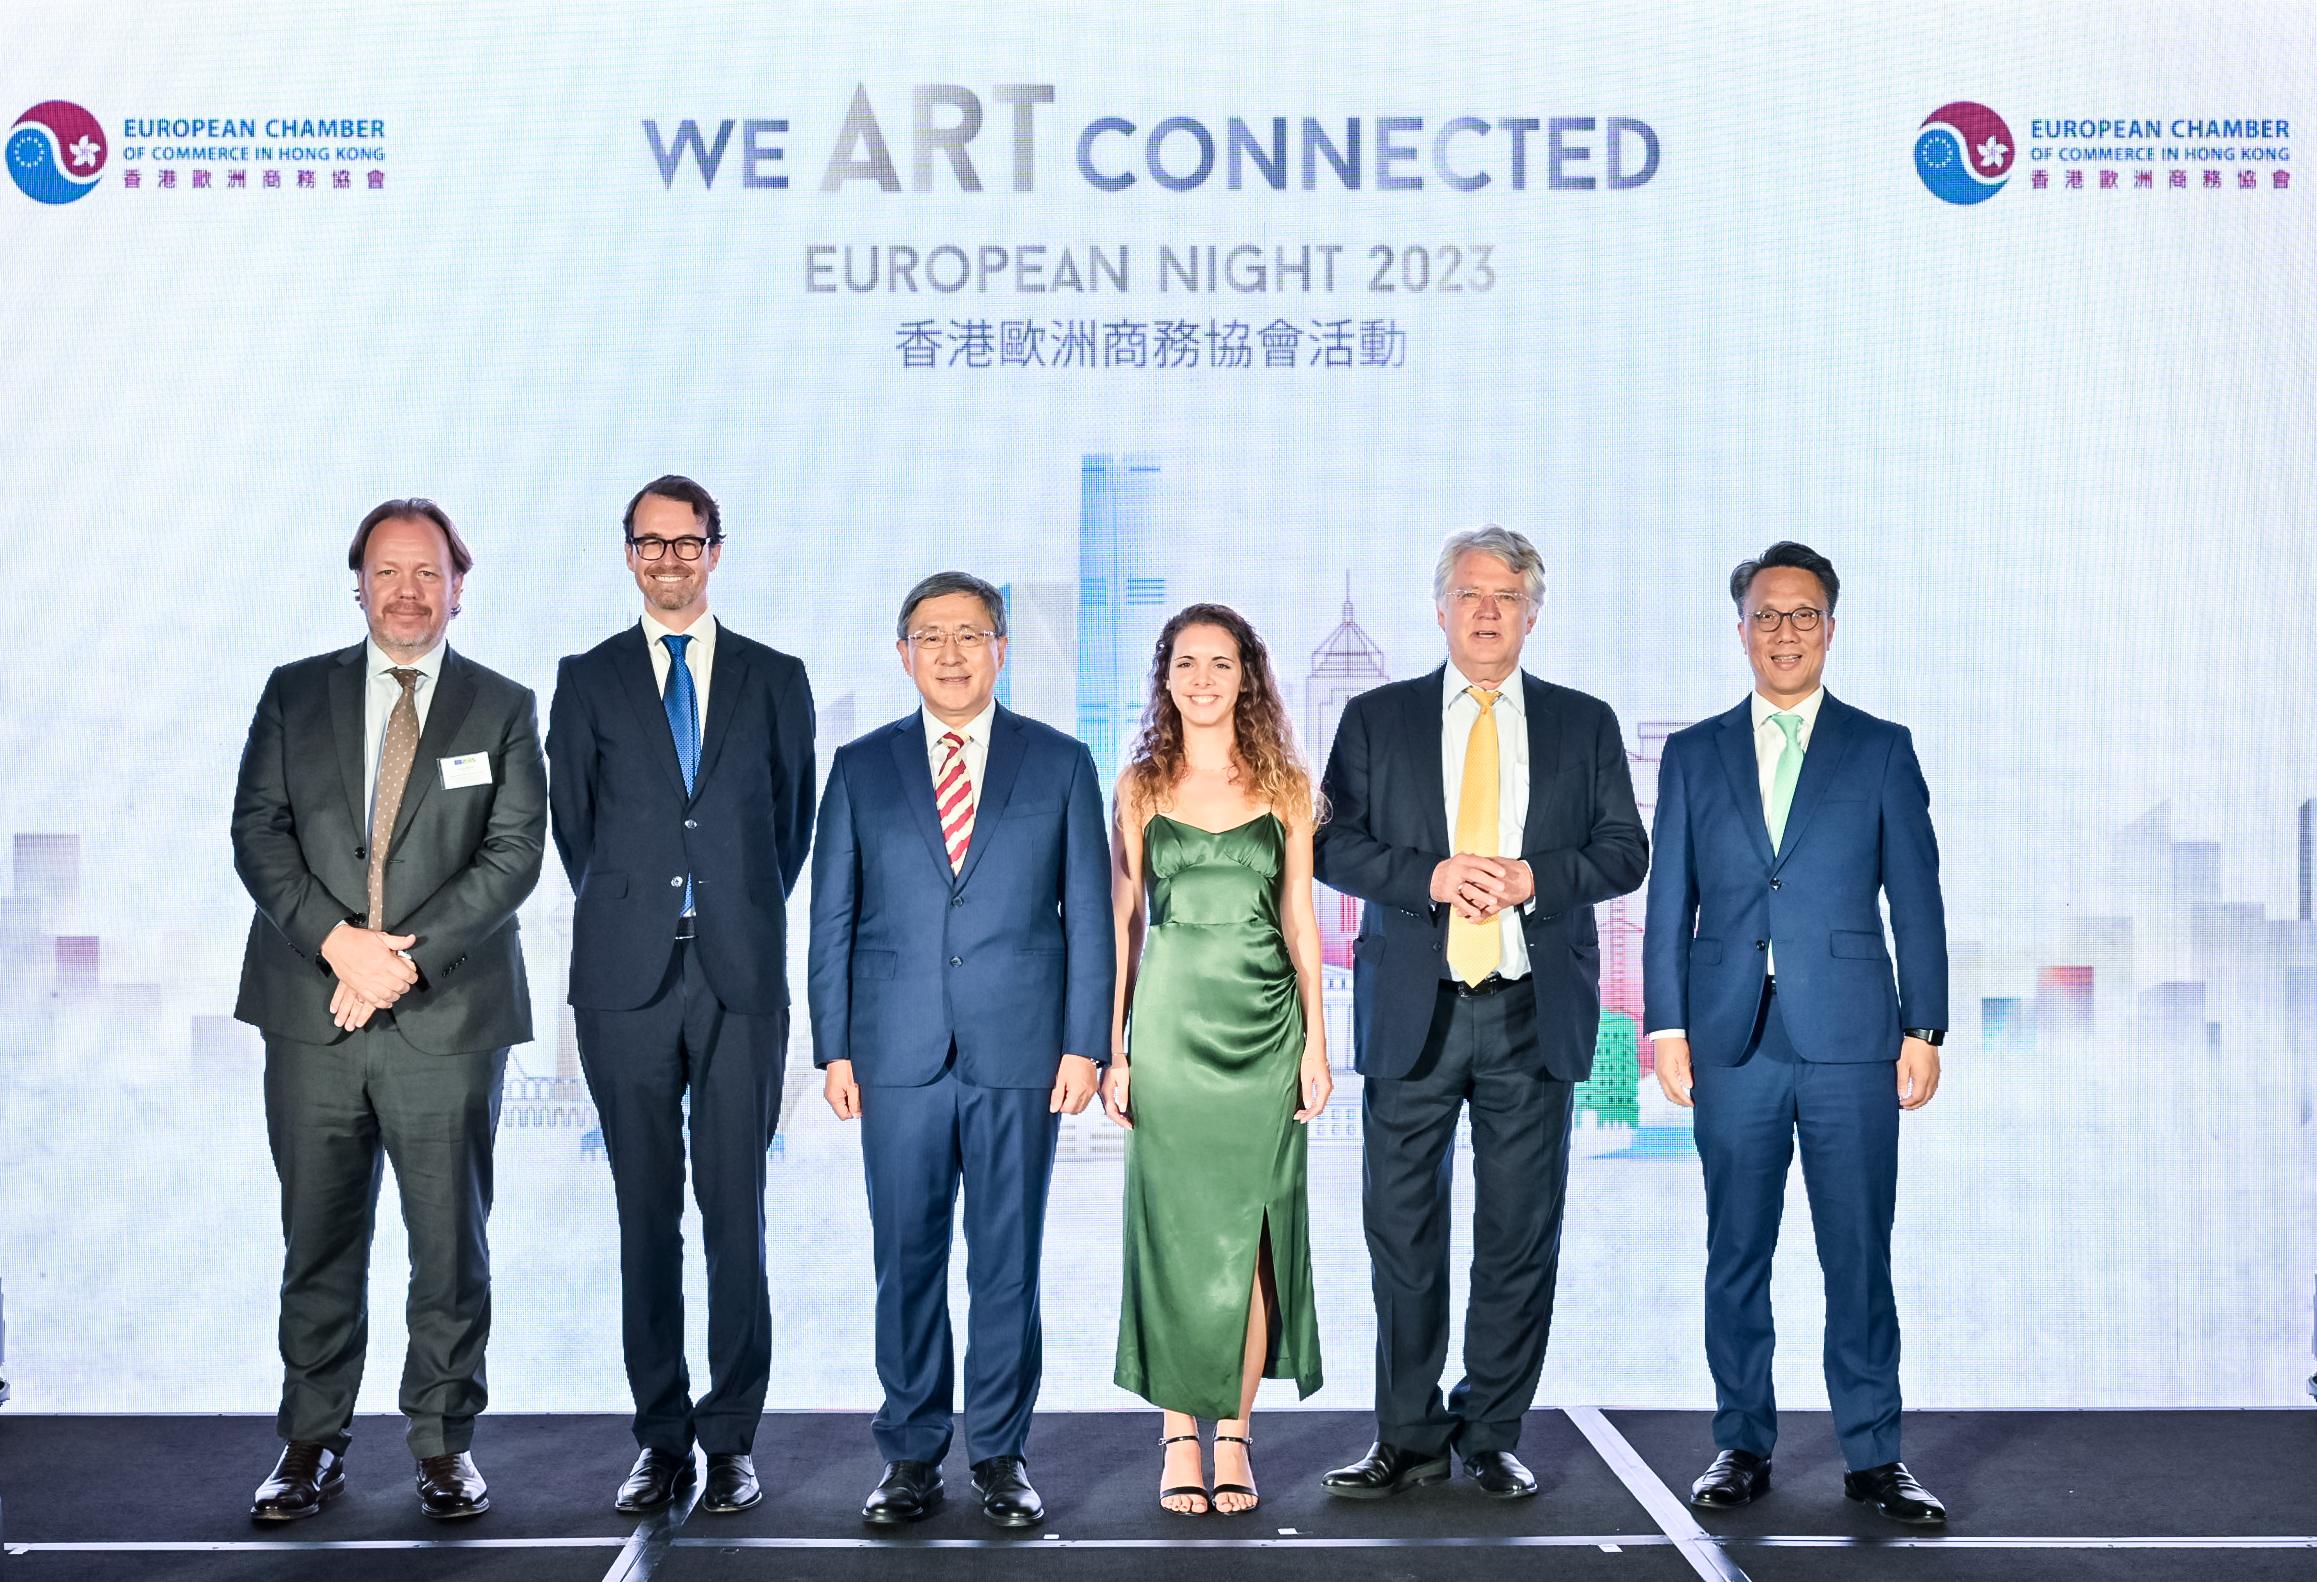 The Deputy Chief Secretary for Administration, Mr Cheuk Wing-hing, attended the European Night 2023 organised by the European Chamber of Commerce in Hong Kong tonight (September 25). Photo shows Mr Cheuk (third left); the Chairman of the European Chamber of Commerce in Hong Kong, Mr Inaki Amate (second left); the Head of the European Union Office to Hong Kong and Macao, Mr Thomas Gnocchi (first left), and other officiating guests at the event.